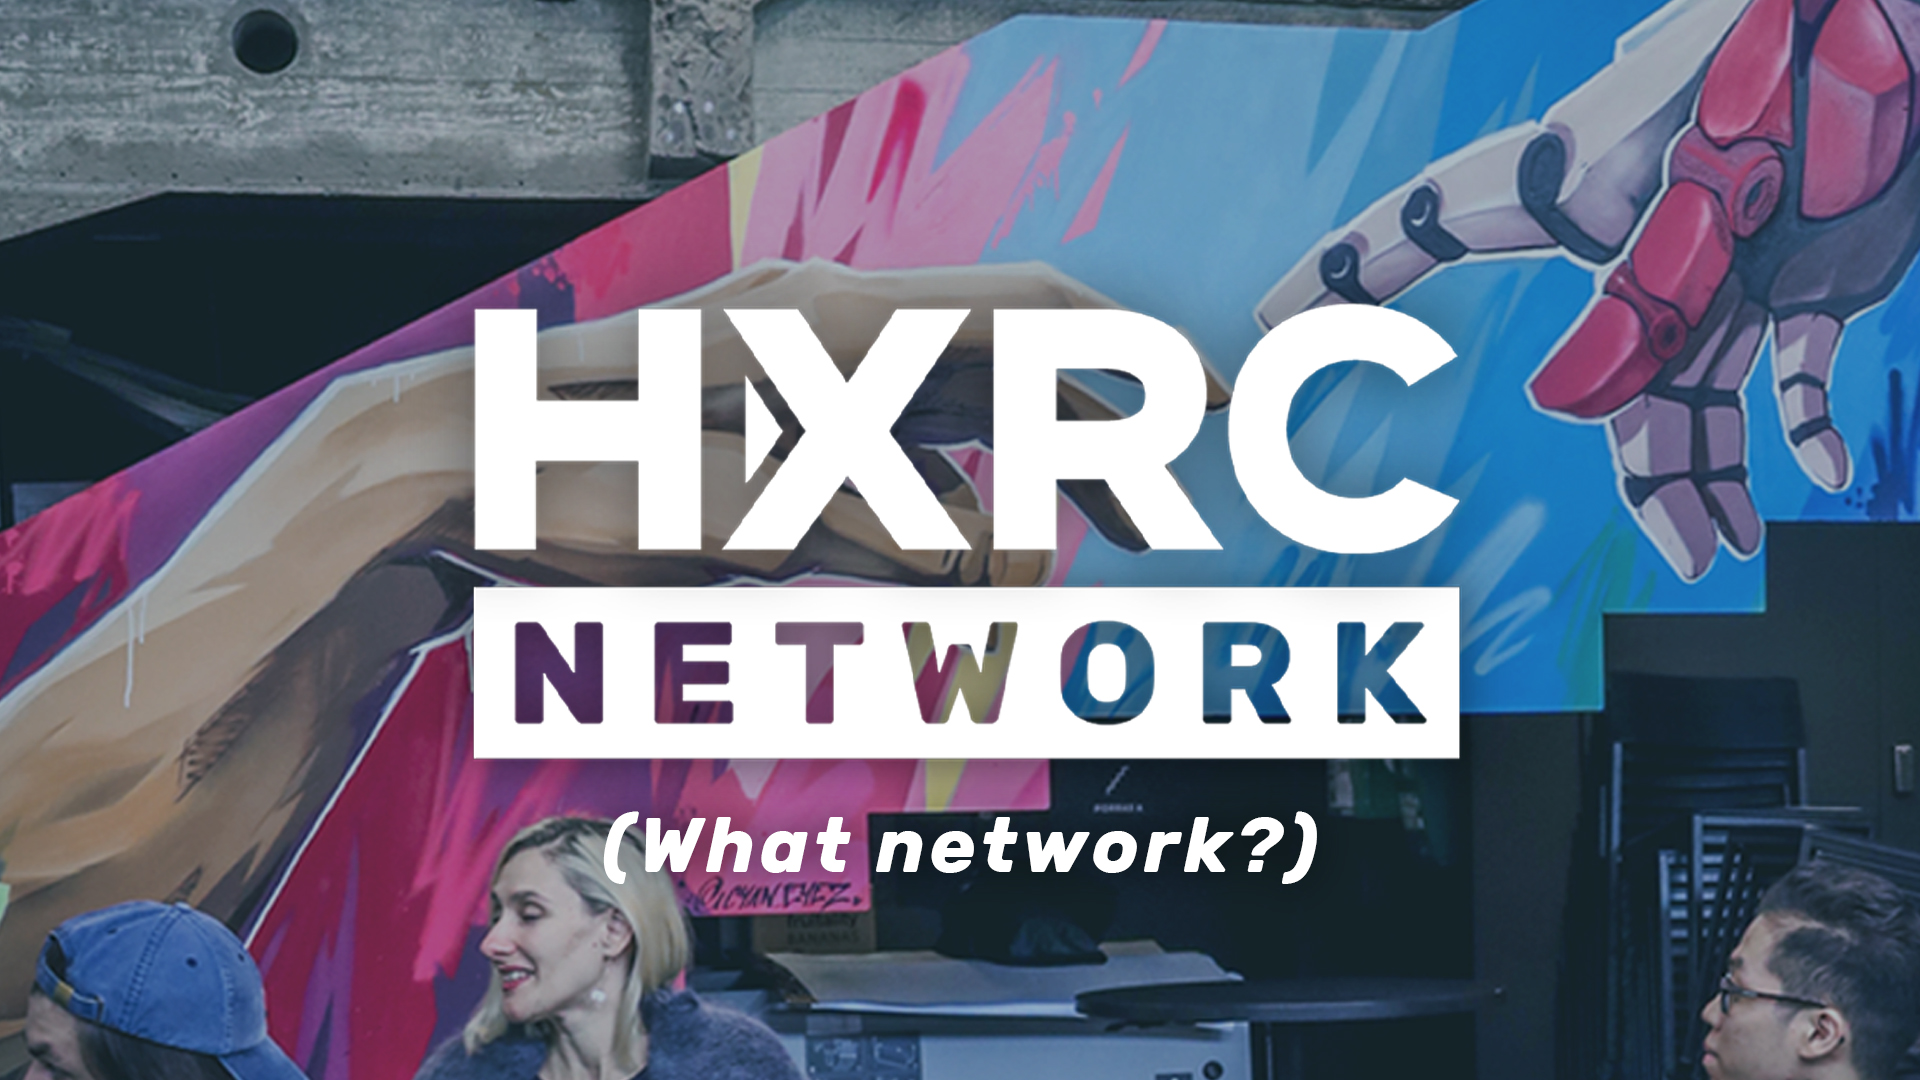 HXRC Network logo wih the text "(What network?)" on top of a picture of a colourful graffiti by Mike Leggat (aka Cyan Eyez). The graffiti is an imitation of the index fingers of two separate beings almost touching, from the famous painting "The Creation of Adam" by Michelangelo, but in this graffiti the other hand is a human hand, and the other hand is a robot hand.